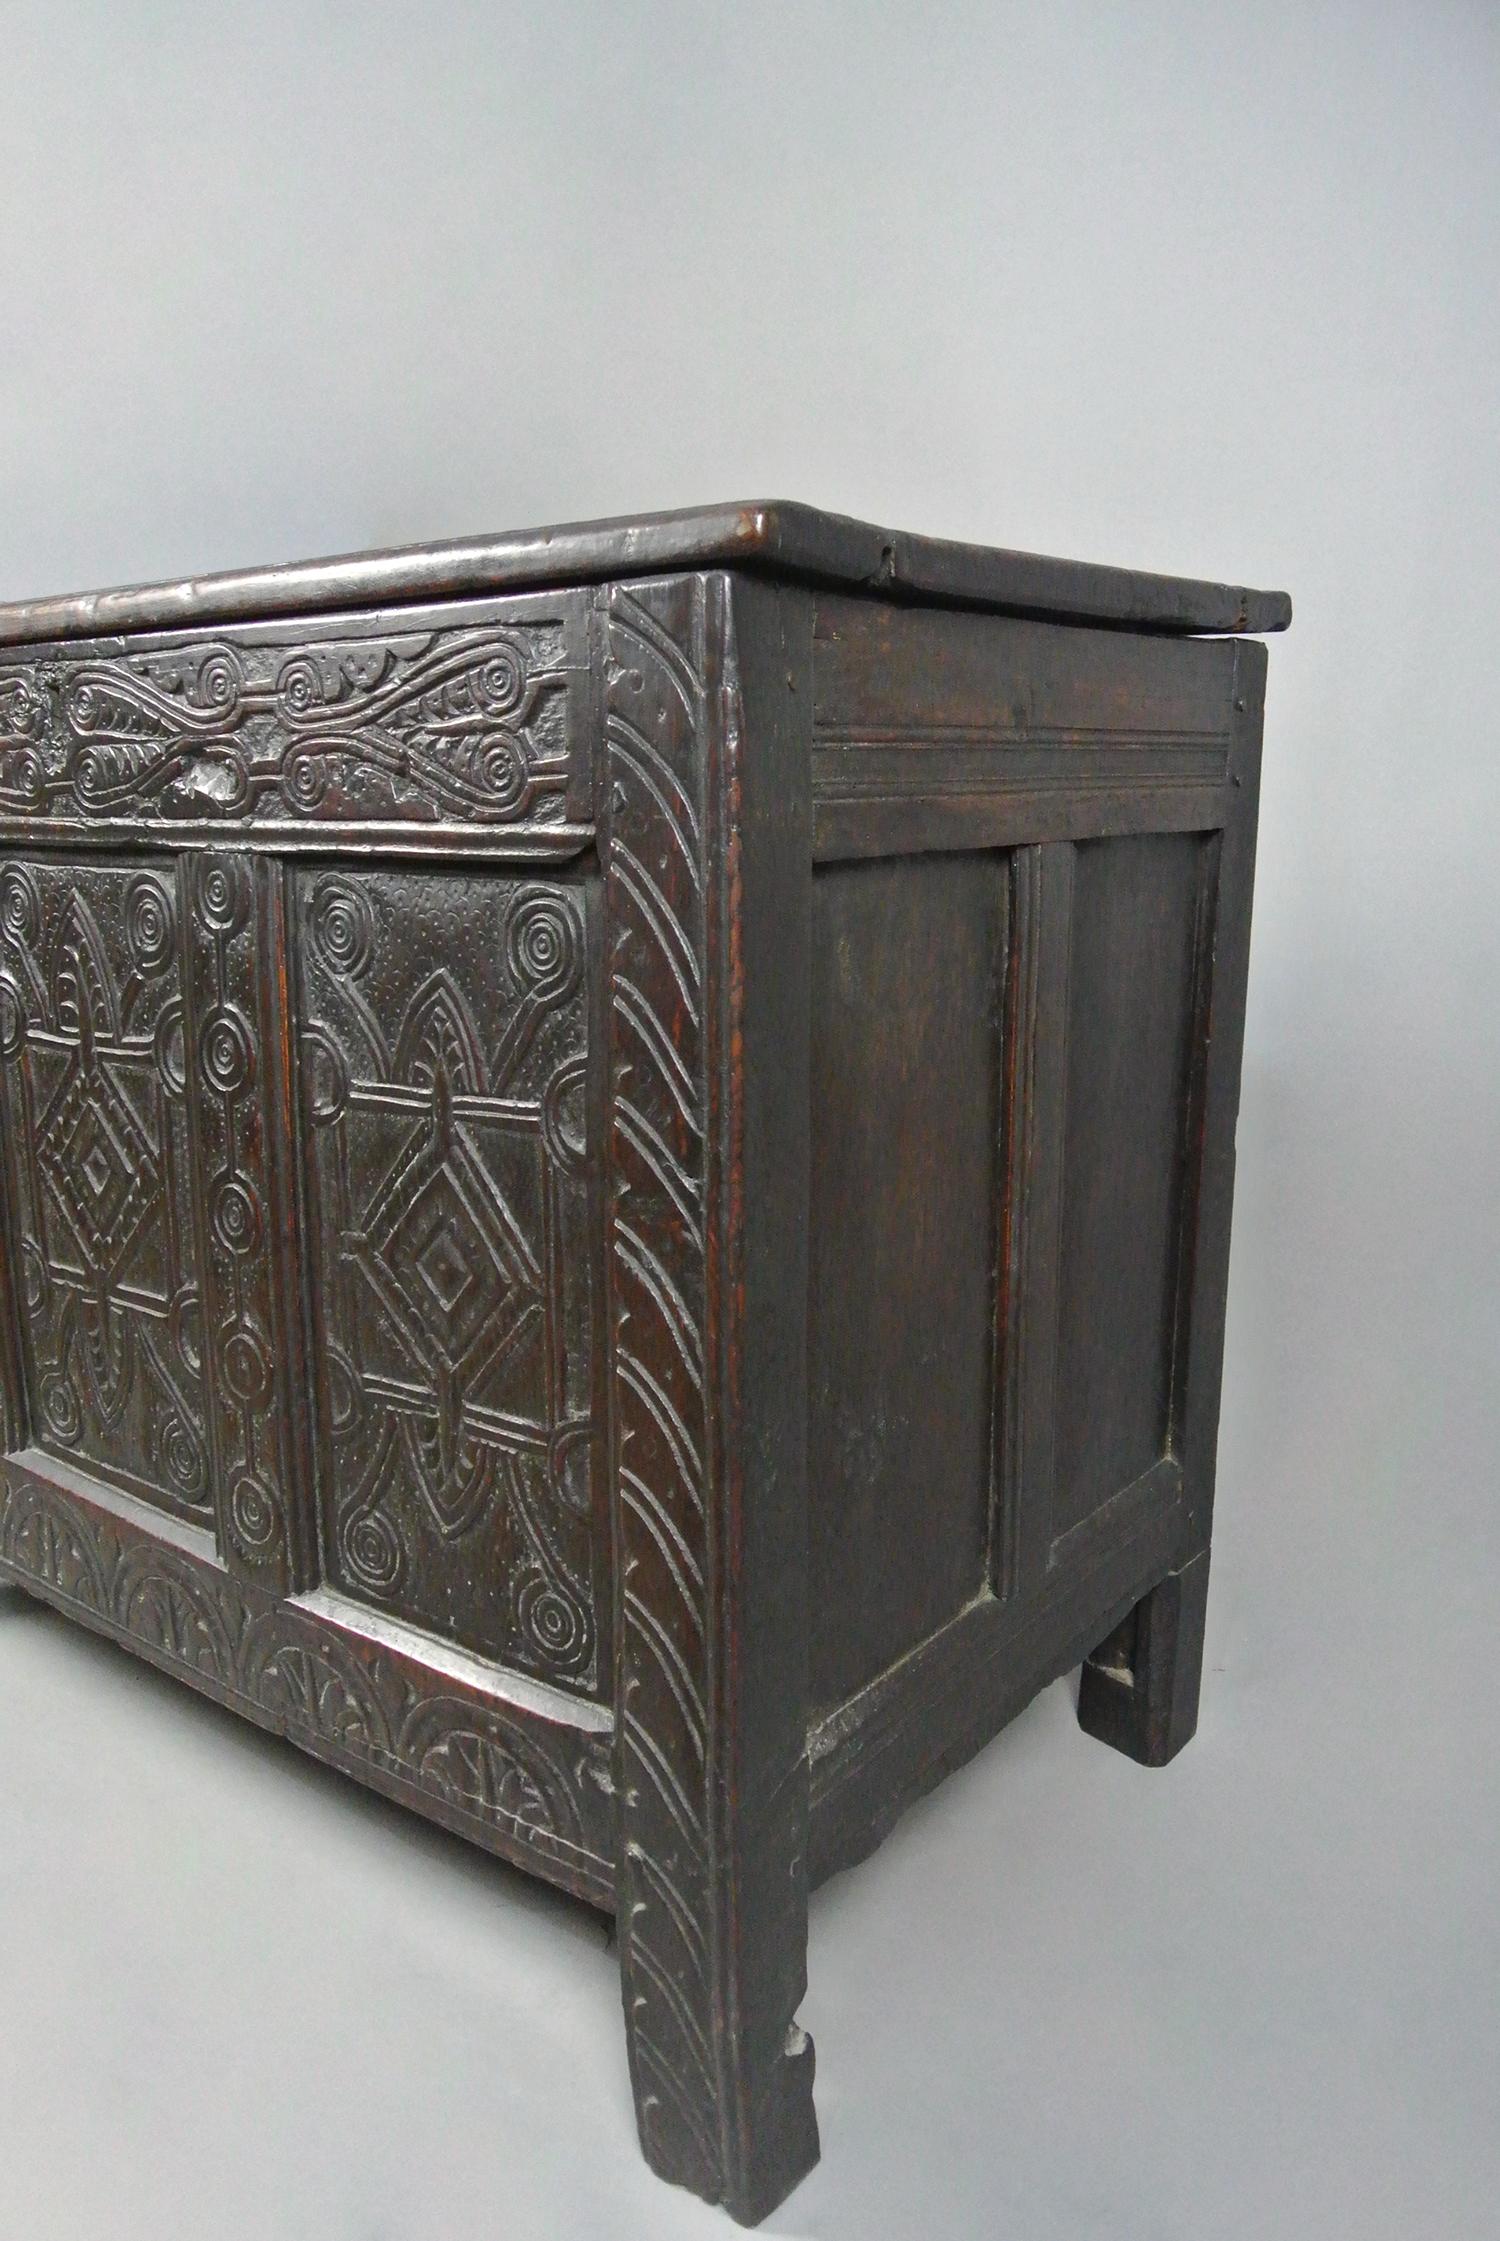 A Very Good Early English Oak Coffer c. 1600 For Sale 2